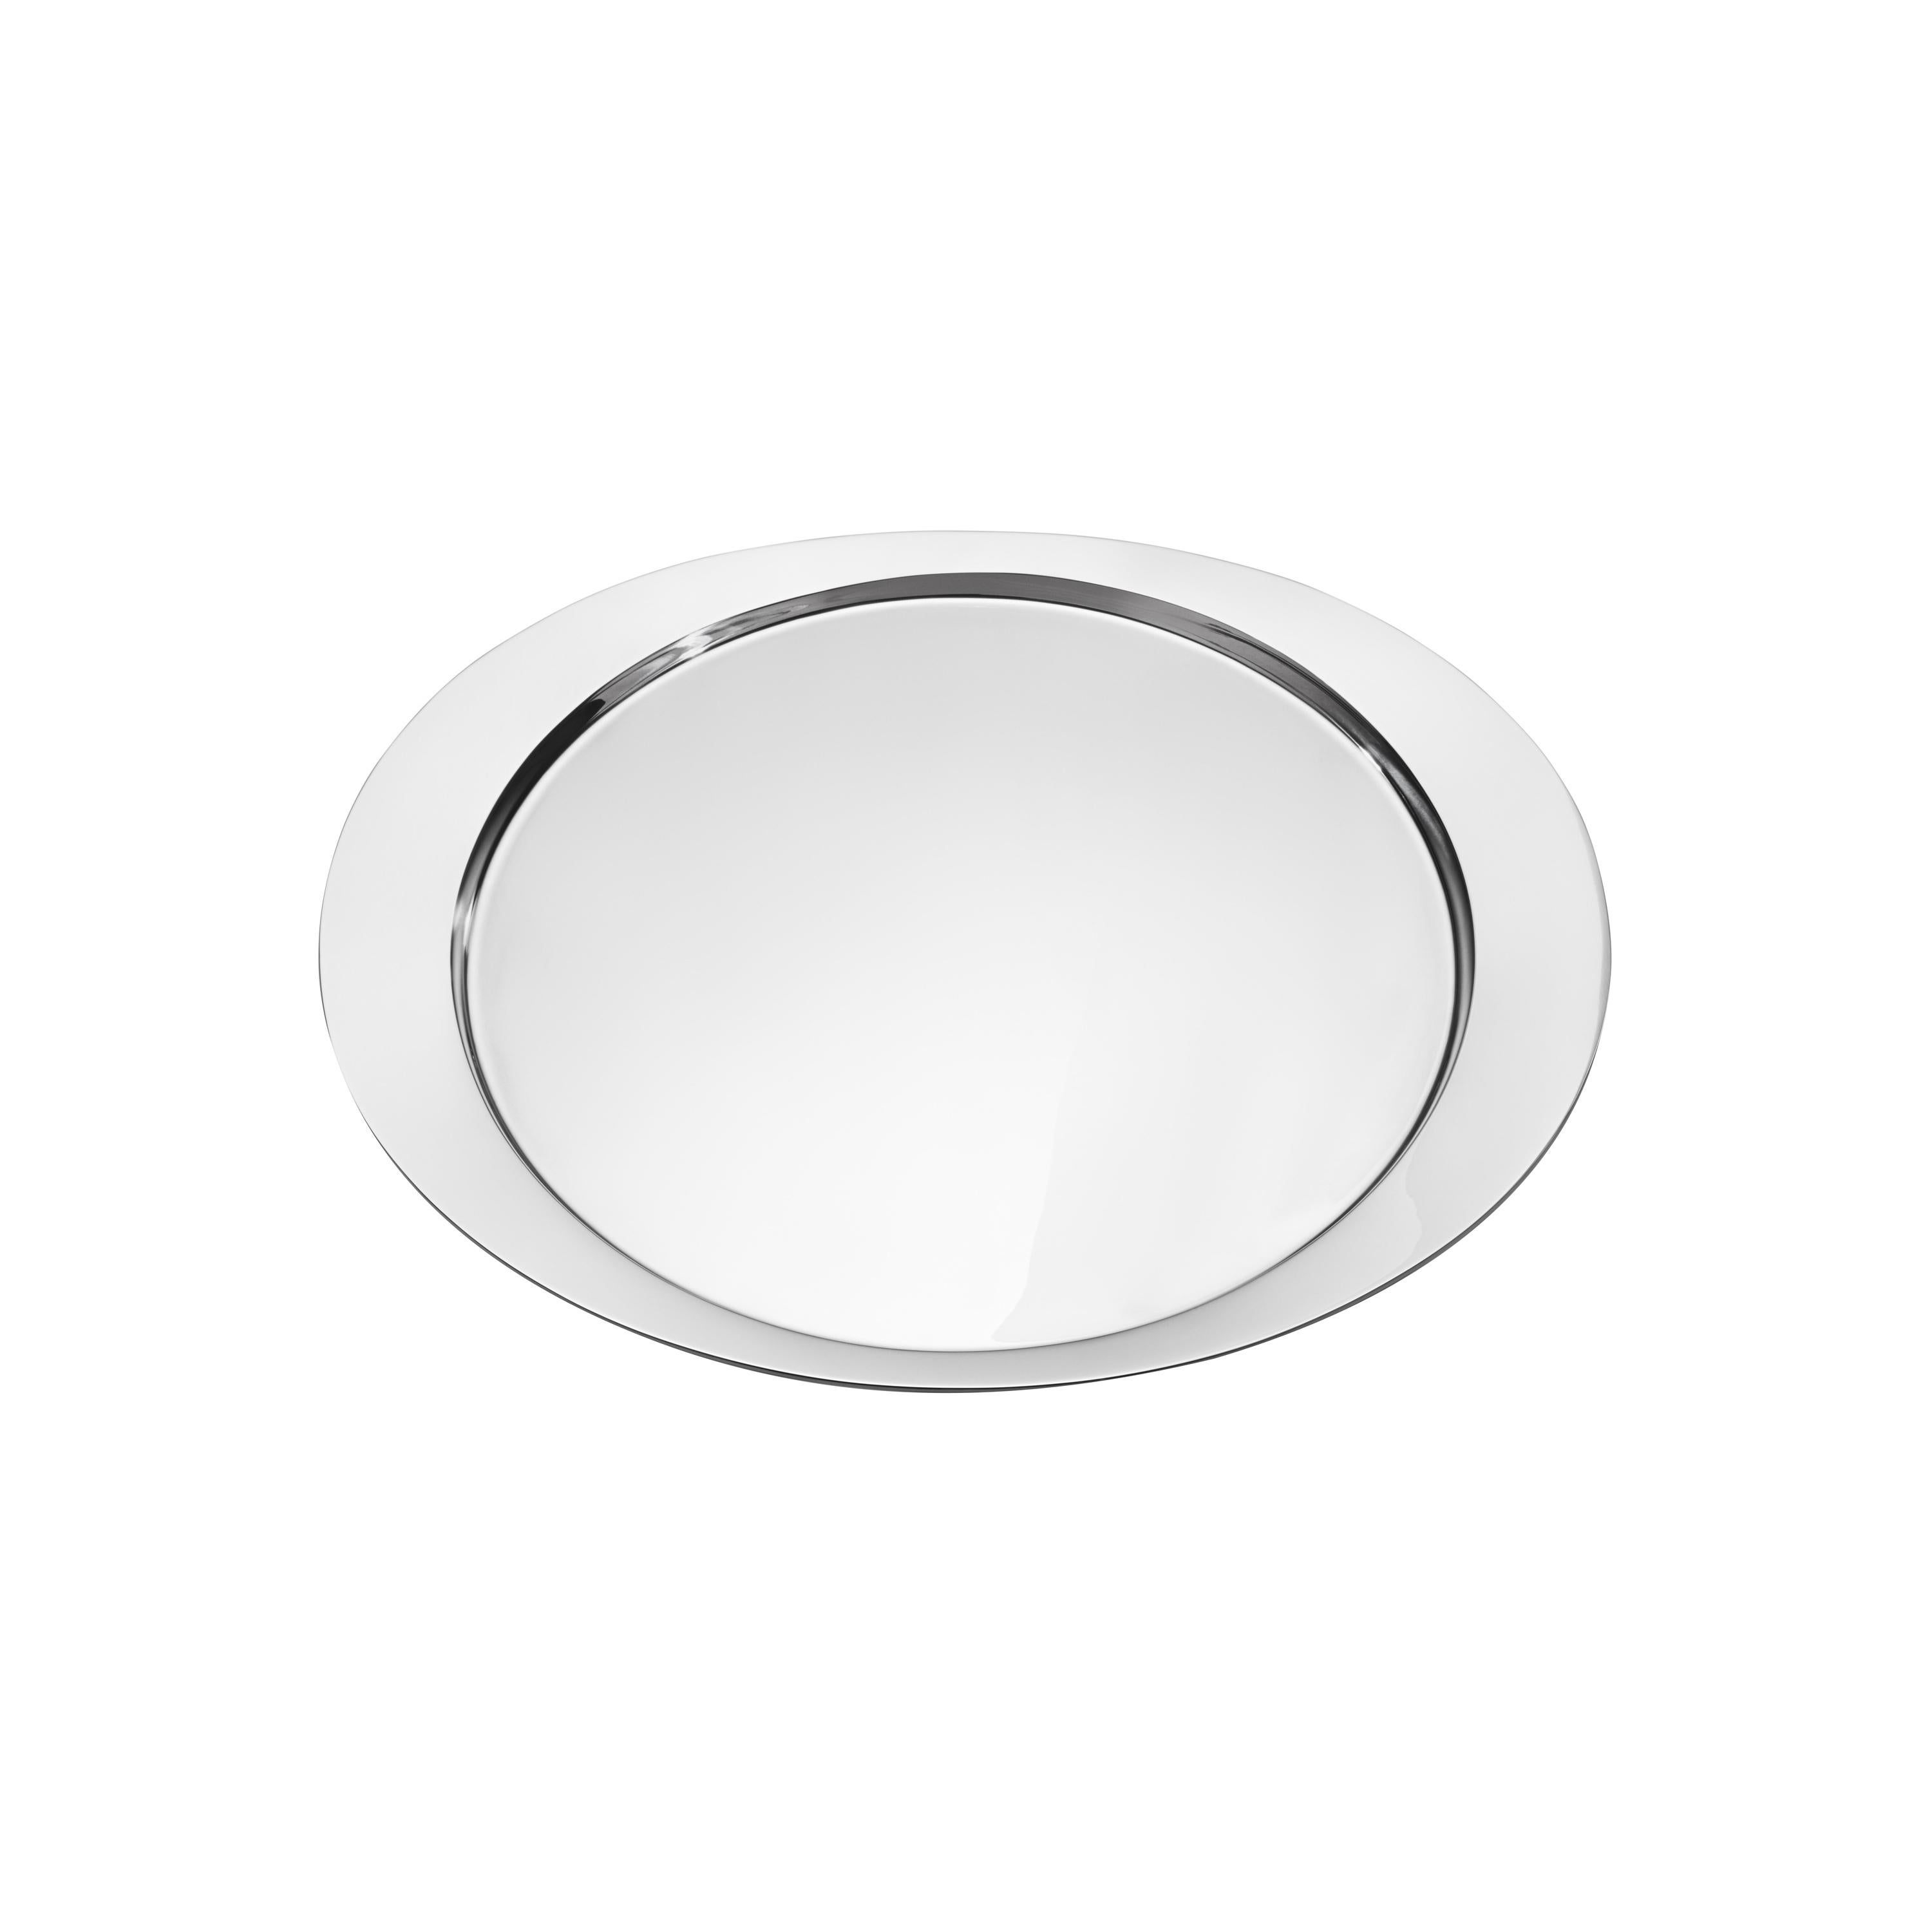 Henning Koppel 1017A Handcrafted Sterling Silver Tray for Georg Jensen